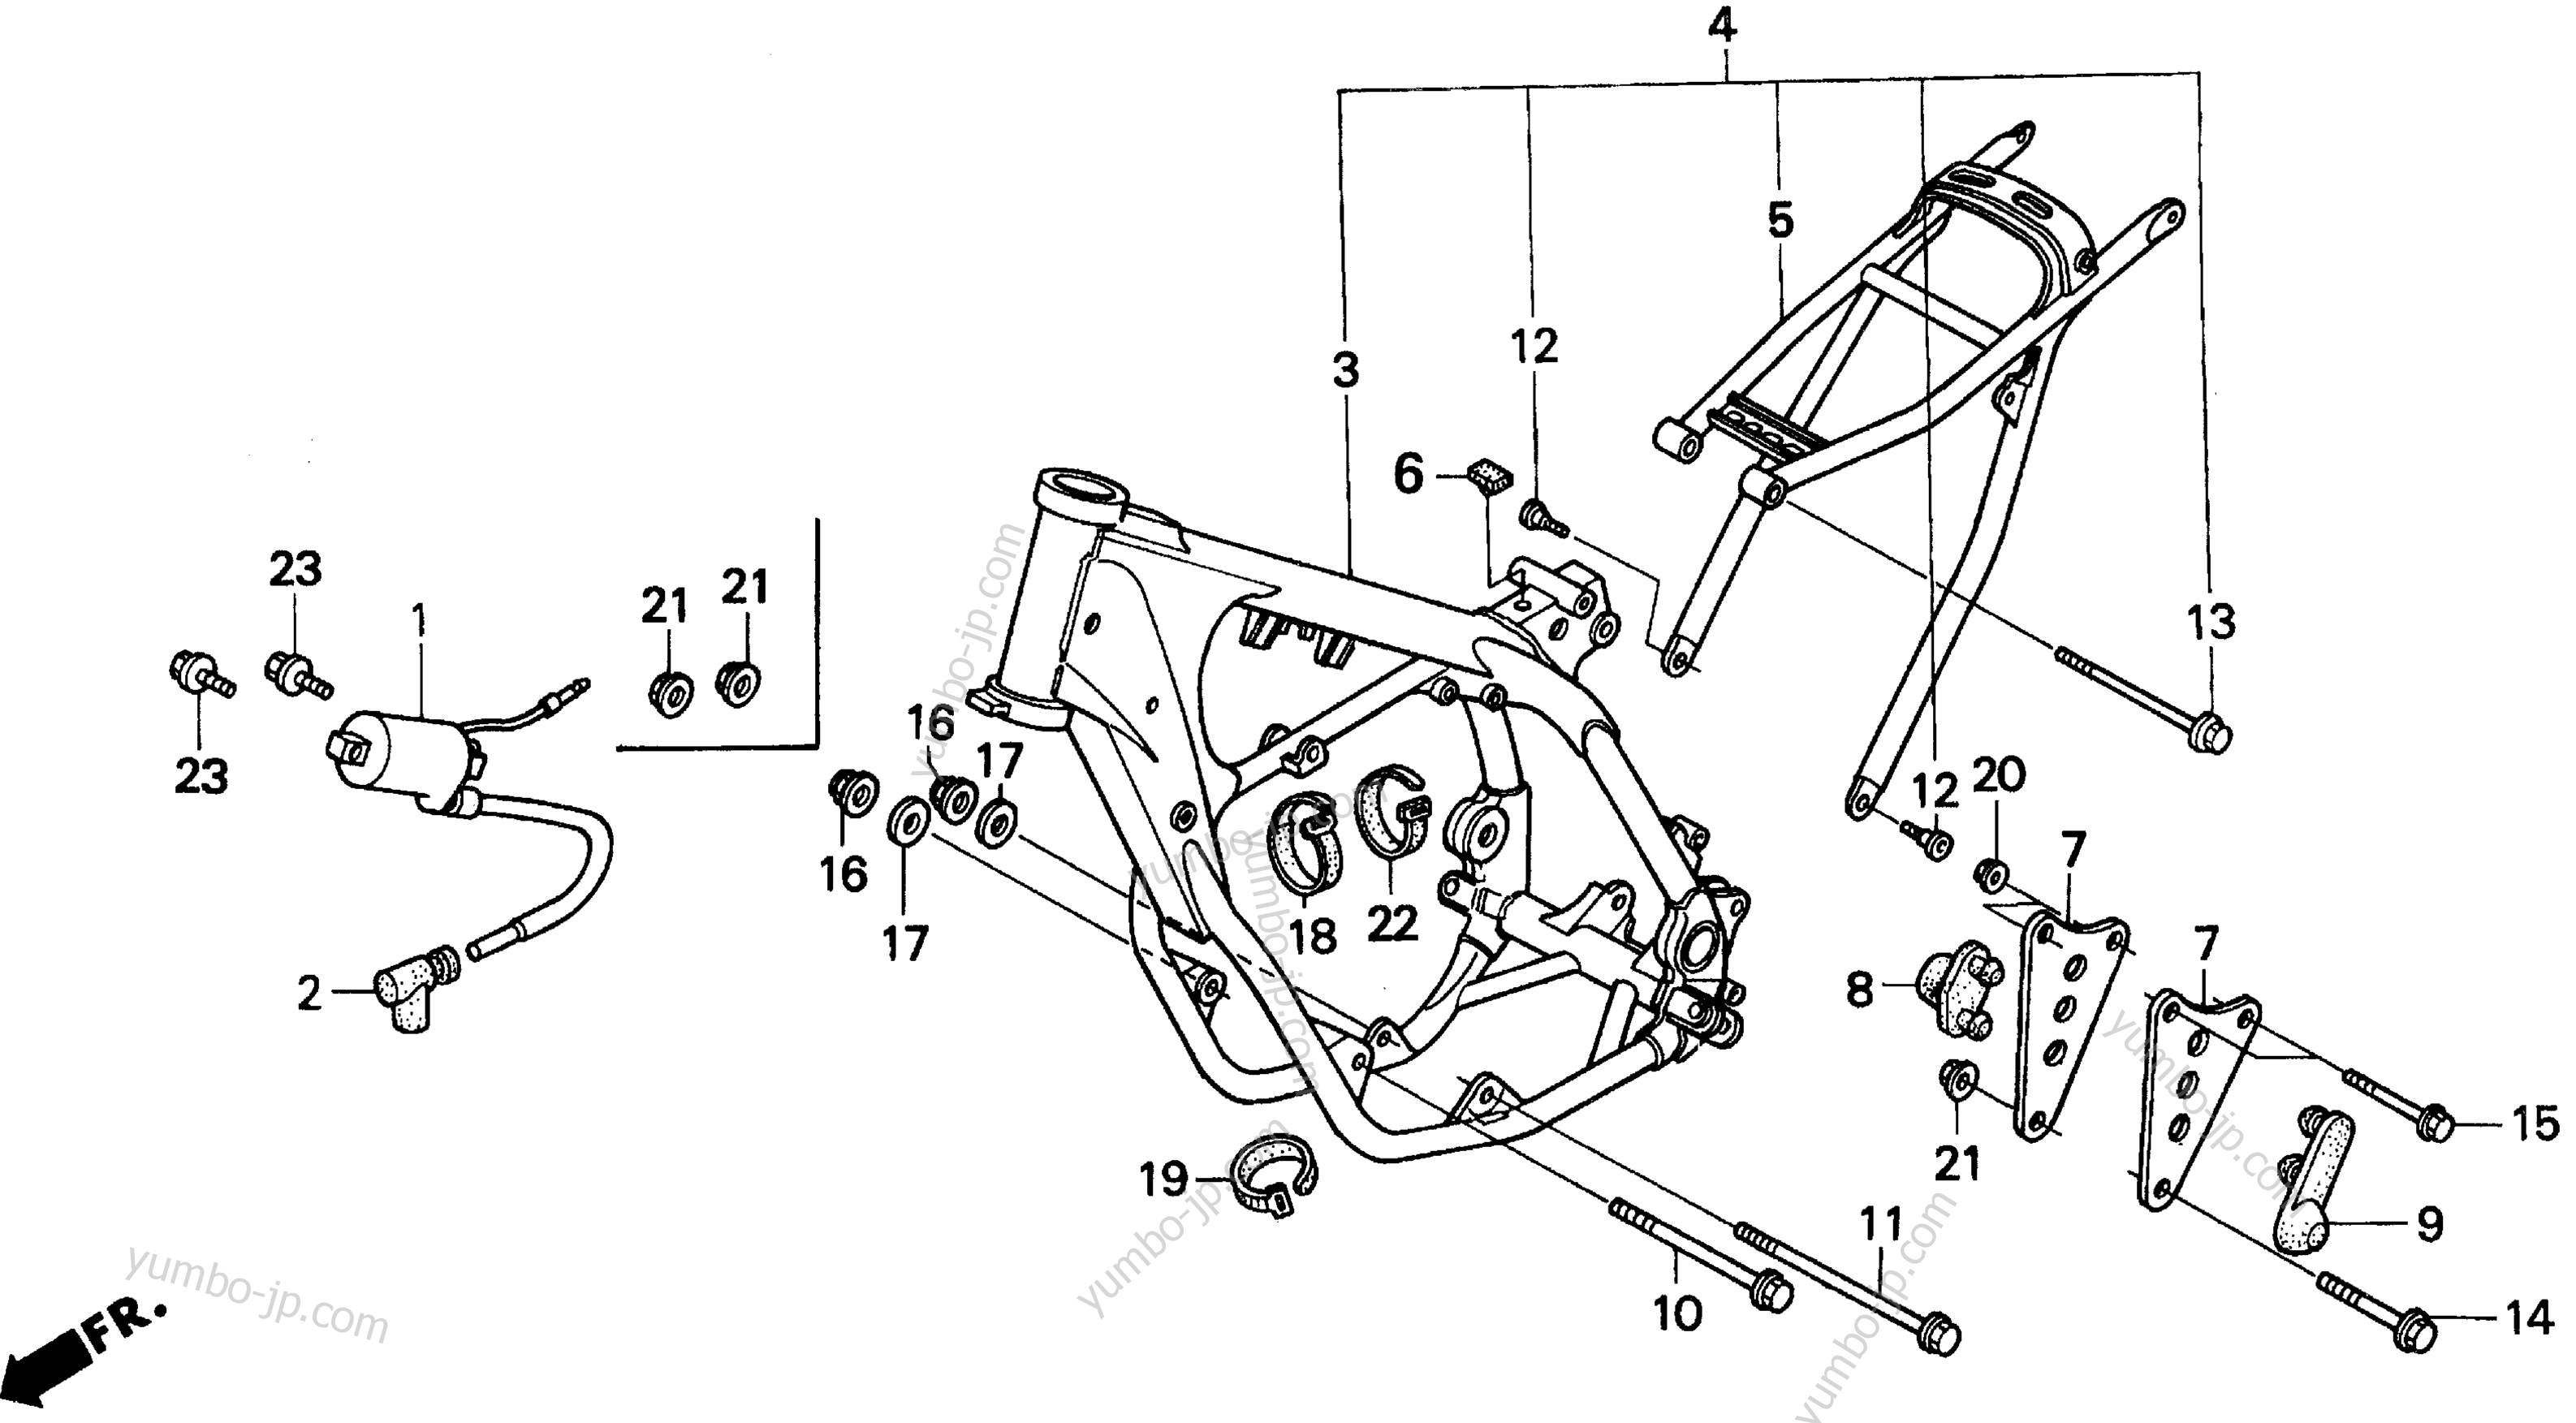 FRAME for motorcycles HONDA CR250R A 1996 year